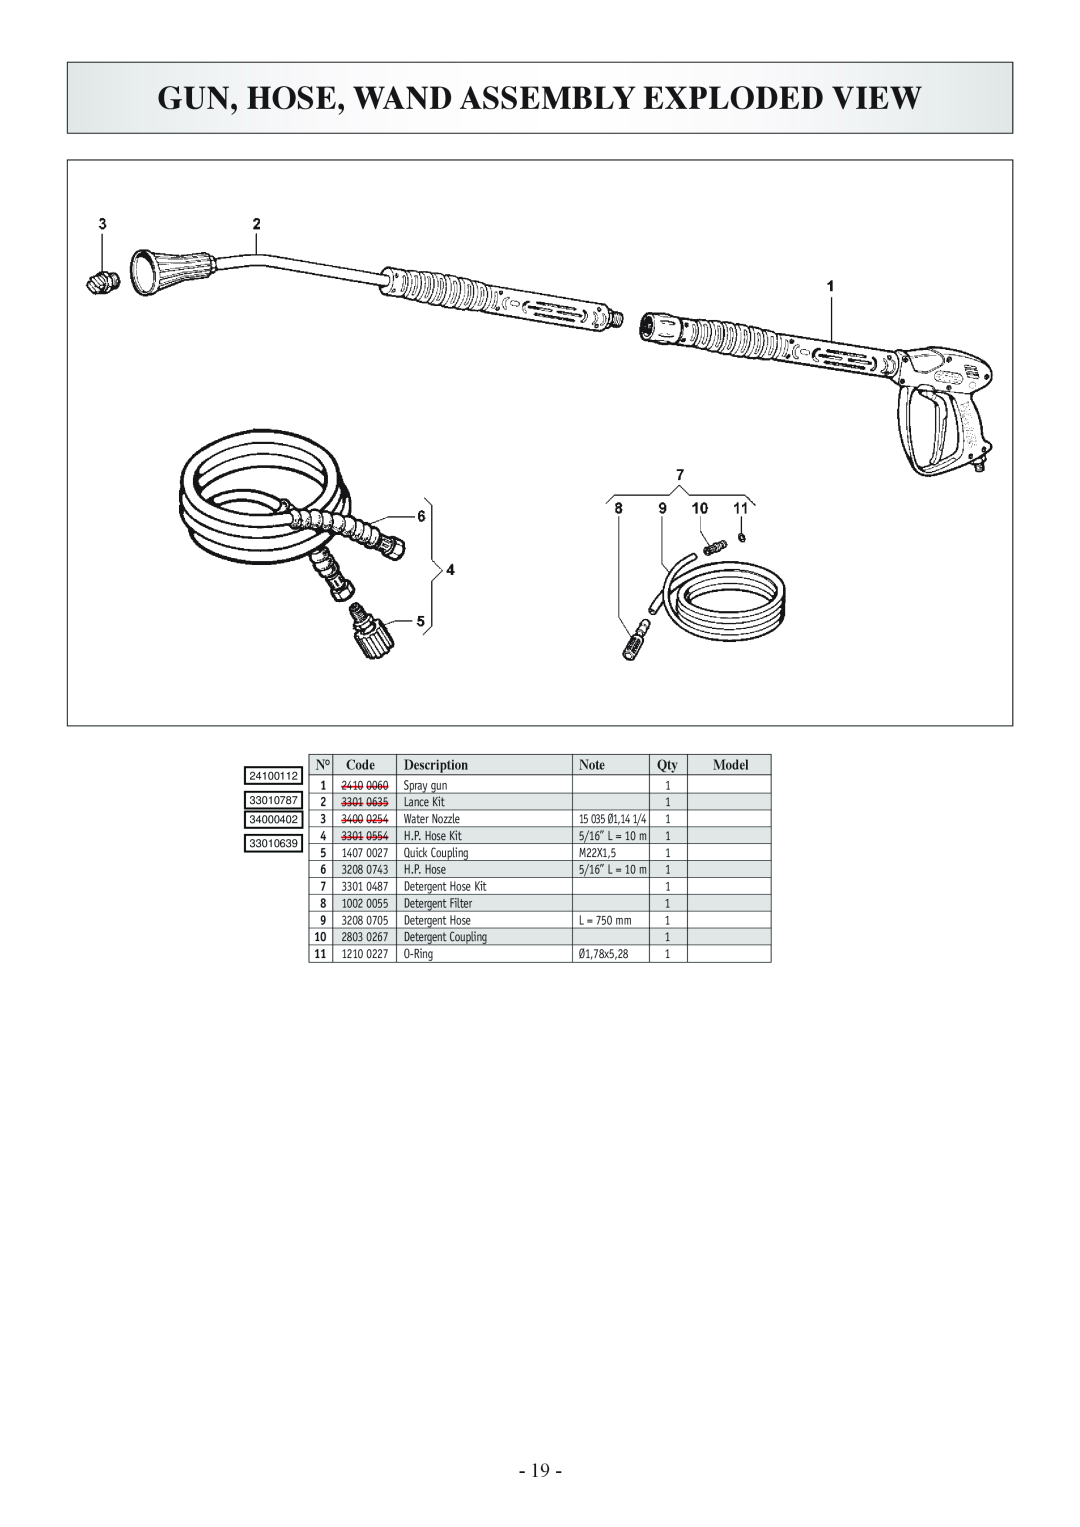 North Star 157394 manual Gun, Hose, Wand Assembly Exploded View, Code, Description, Model 